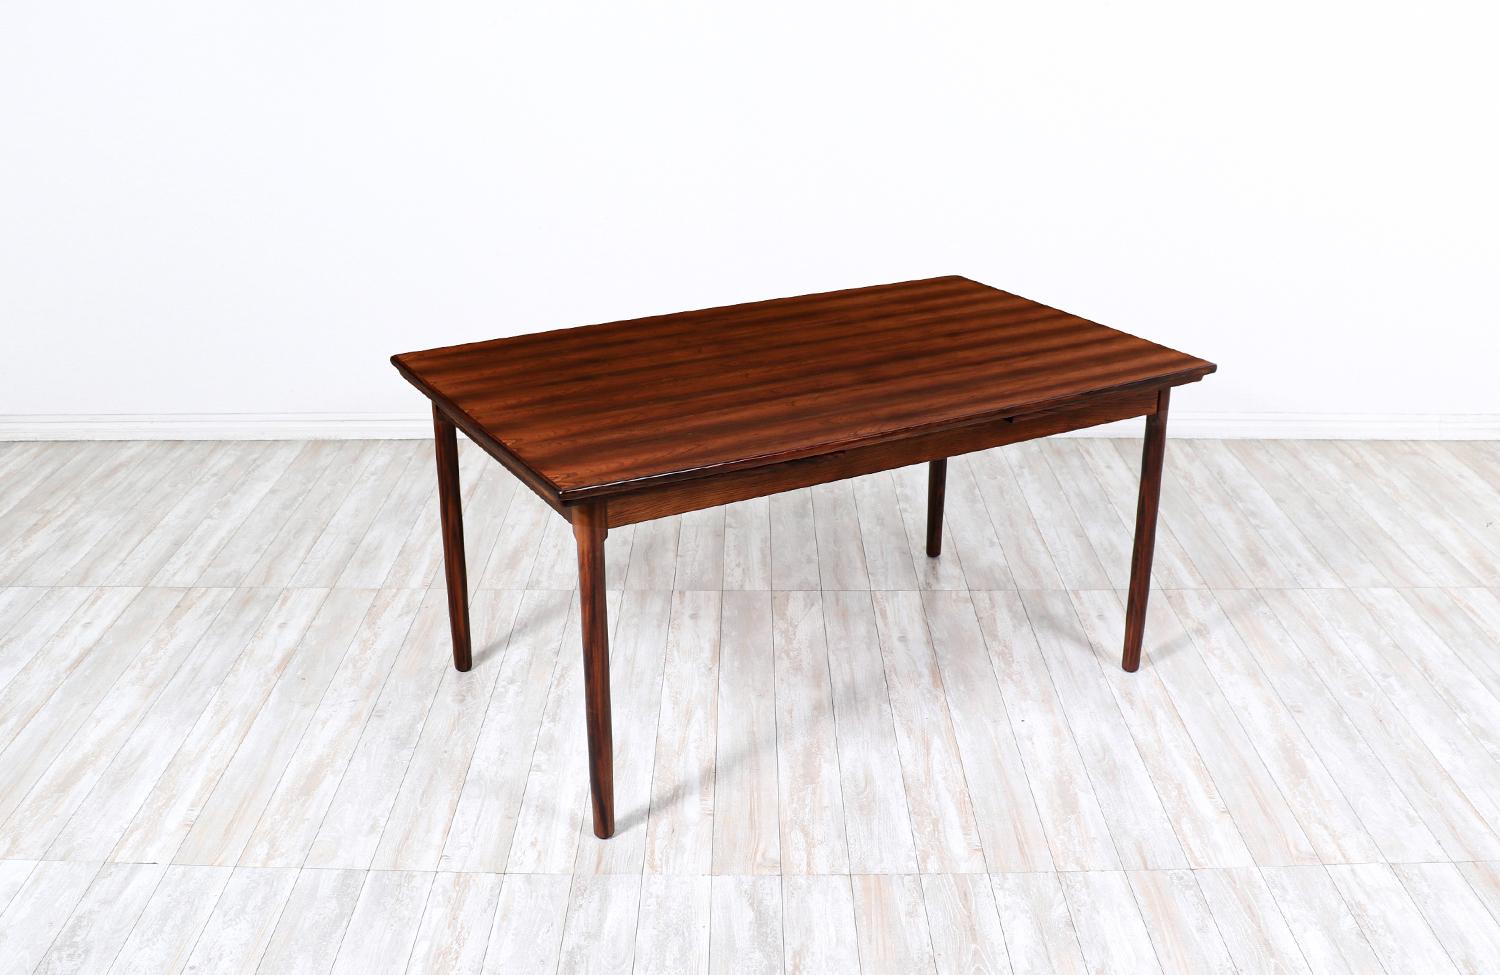 Adorable Danish Modern Rosewood dining table designed by Randers Mobelfabrik and manufactured by Randers Mobelfabrik in Denmark circa 1960s. Made from a solid Brazilian Rosewood base, this exemplary Danish design features two draw leaves that store